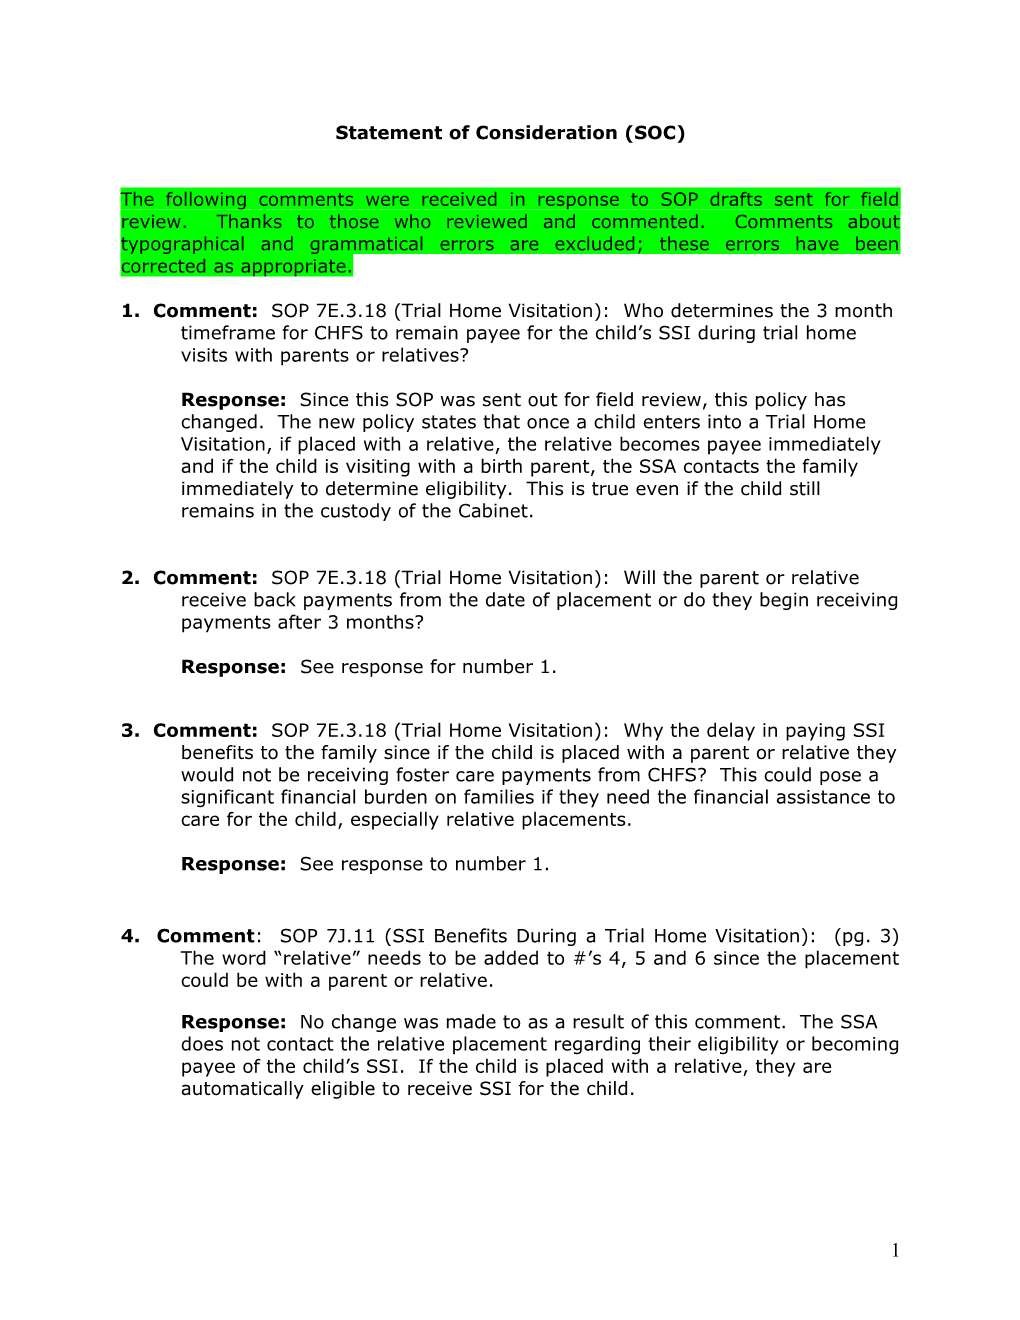 PPTL 09-08 Statement of Consideration Regarding Revisions Made to SOP Affecting out of Home Care